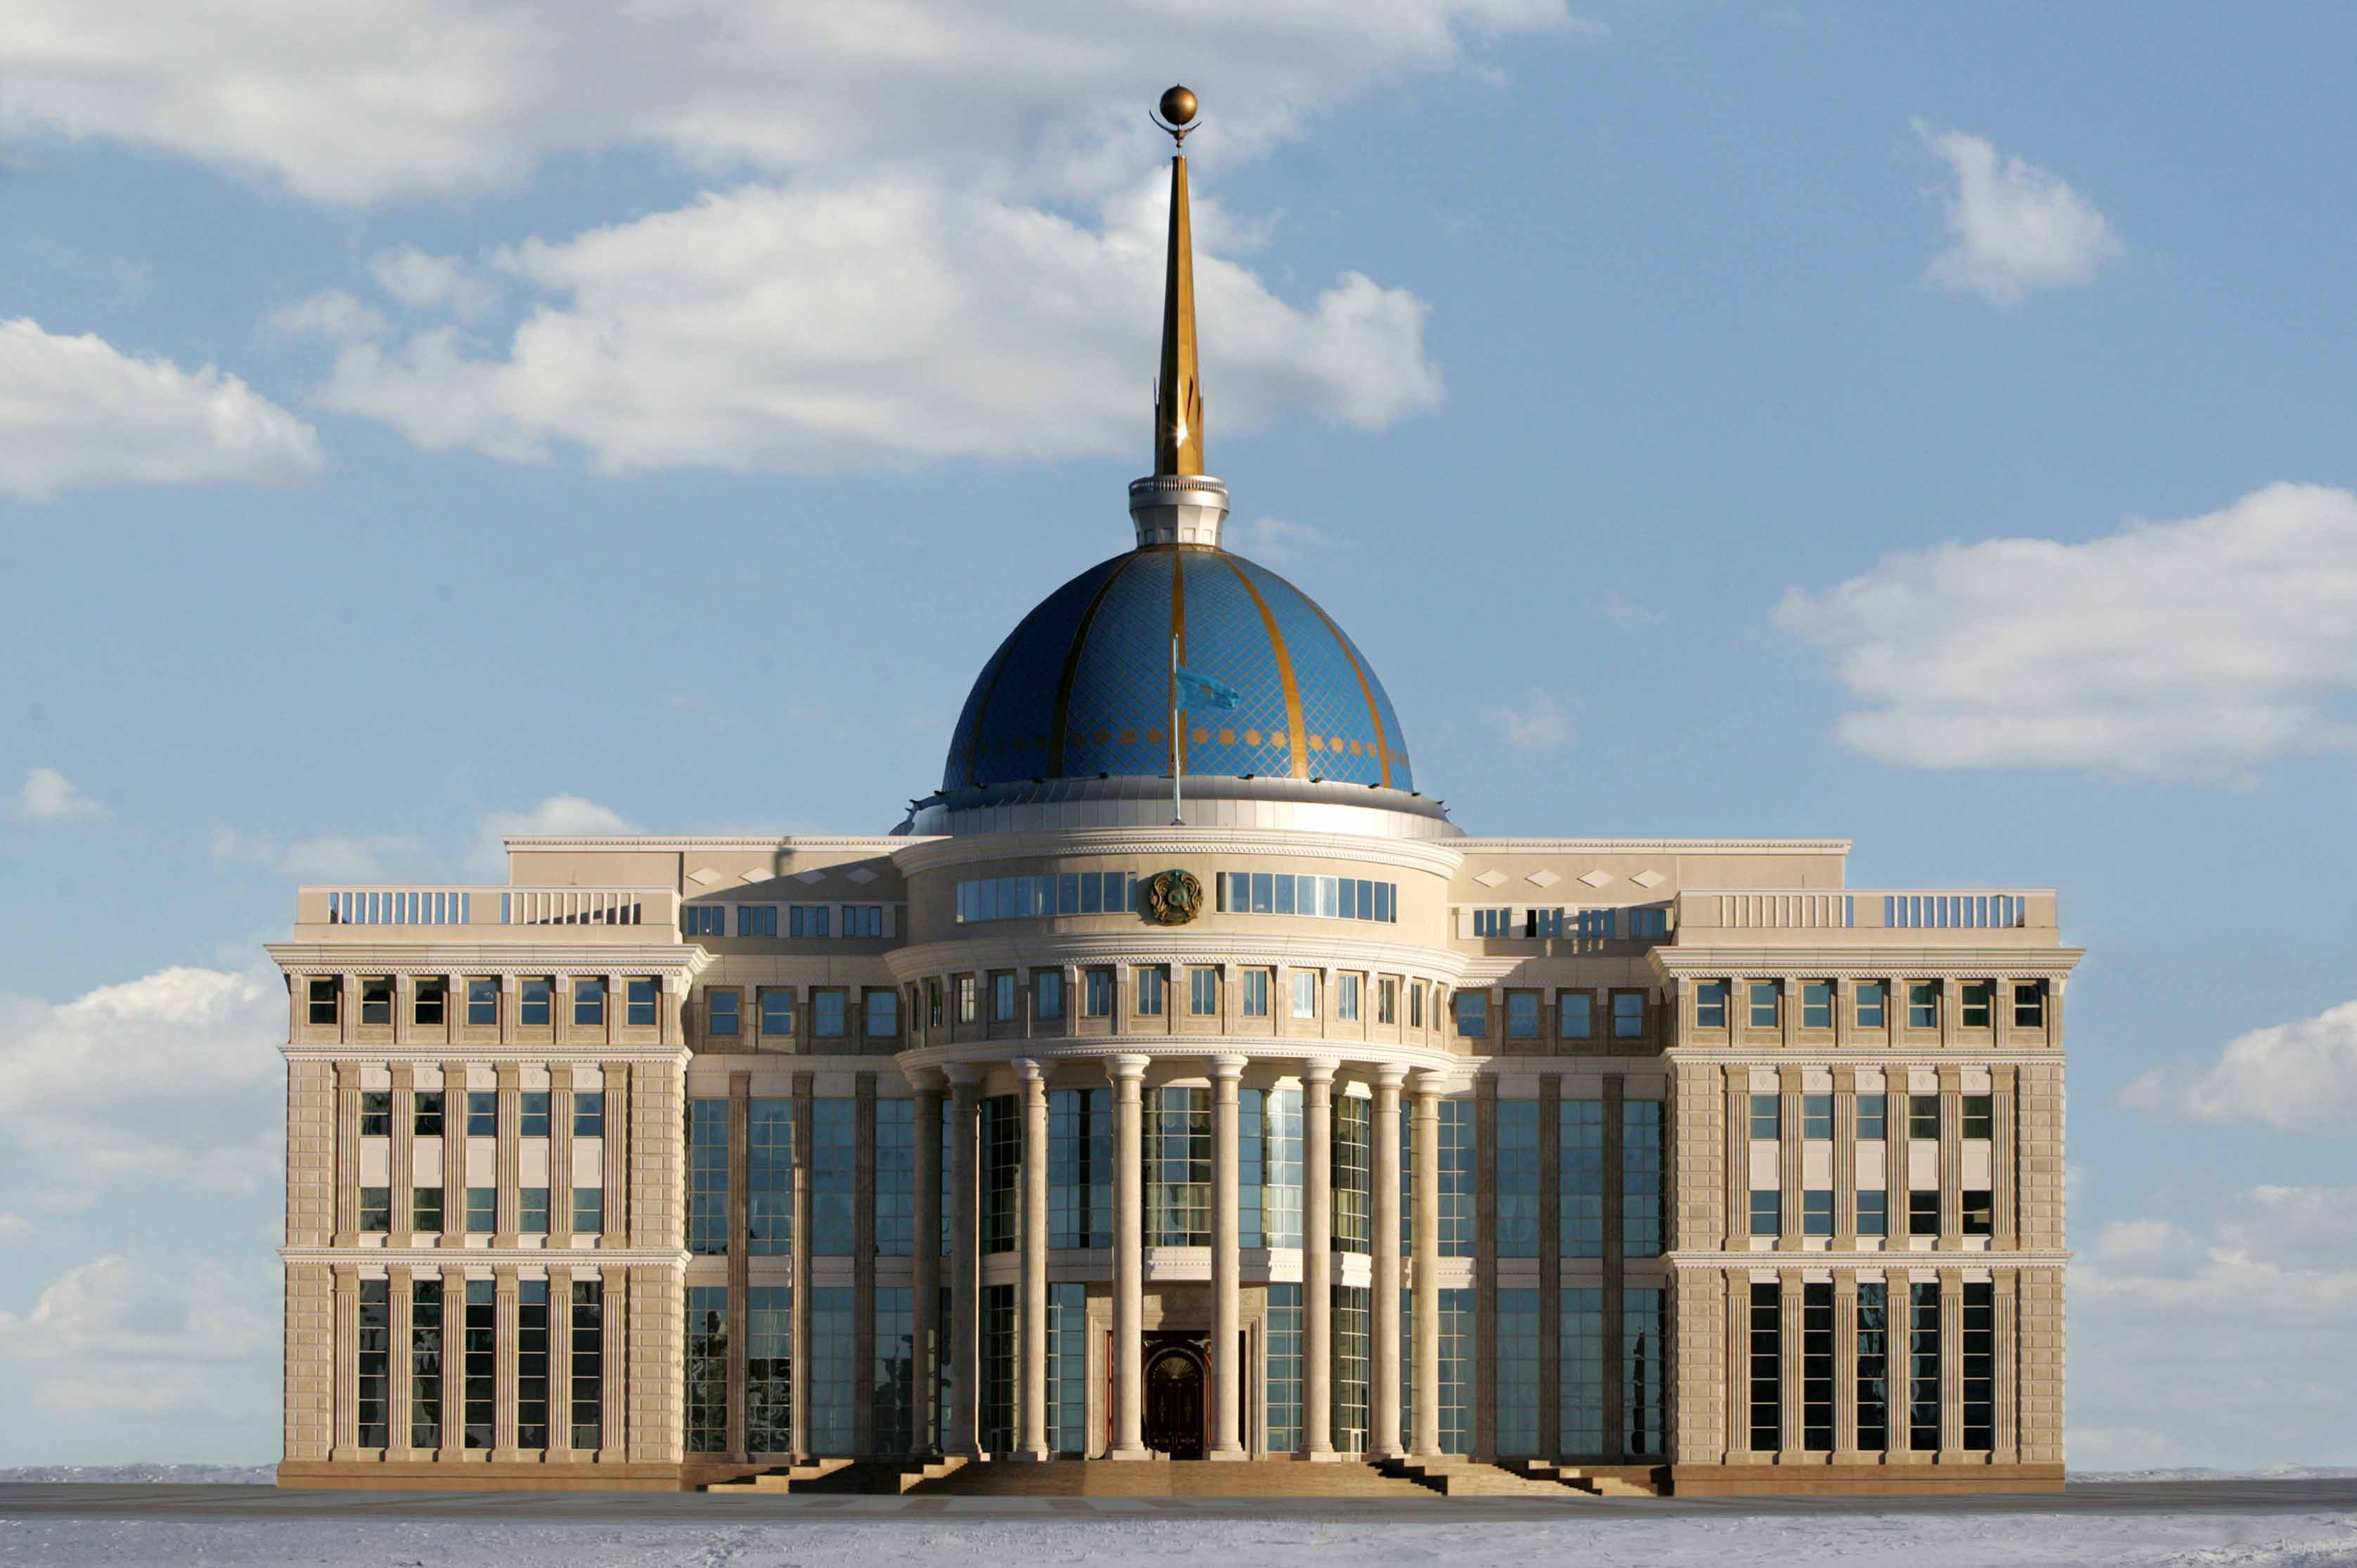 OFFICIAL SITE OF THE PRESIDENT OF THE REPUBLIC OF KAZAKHSTAN